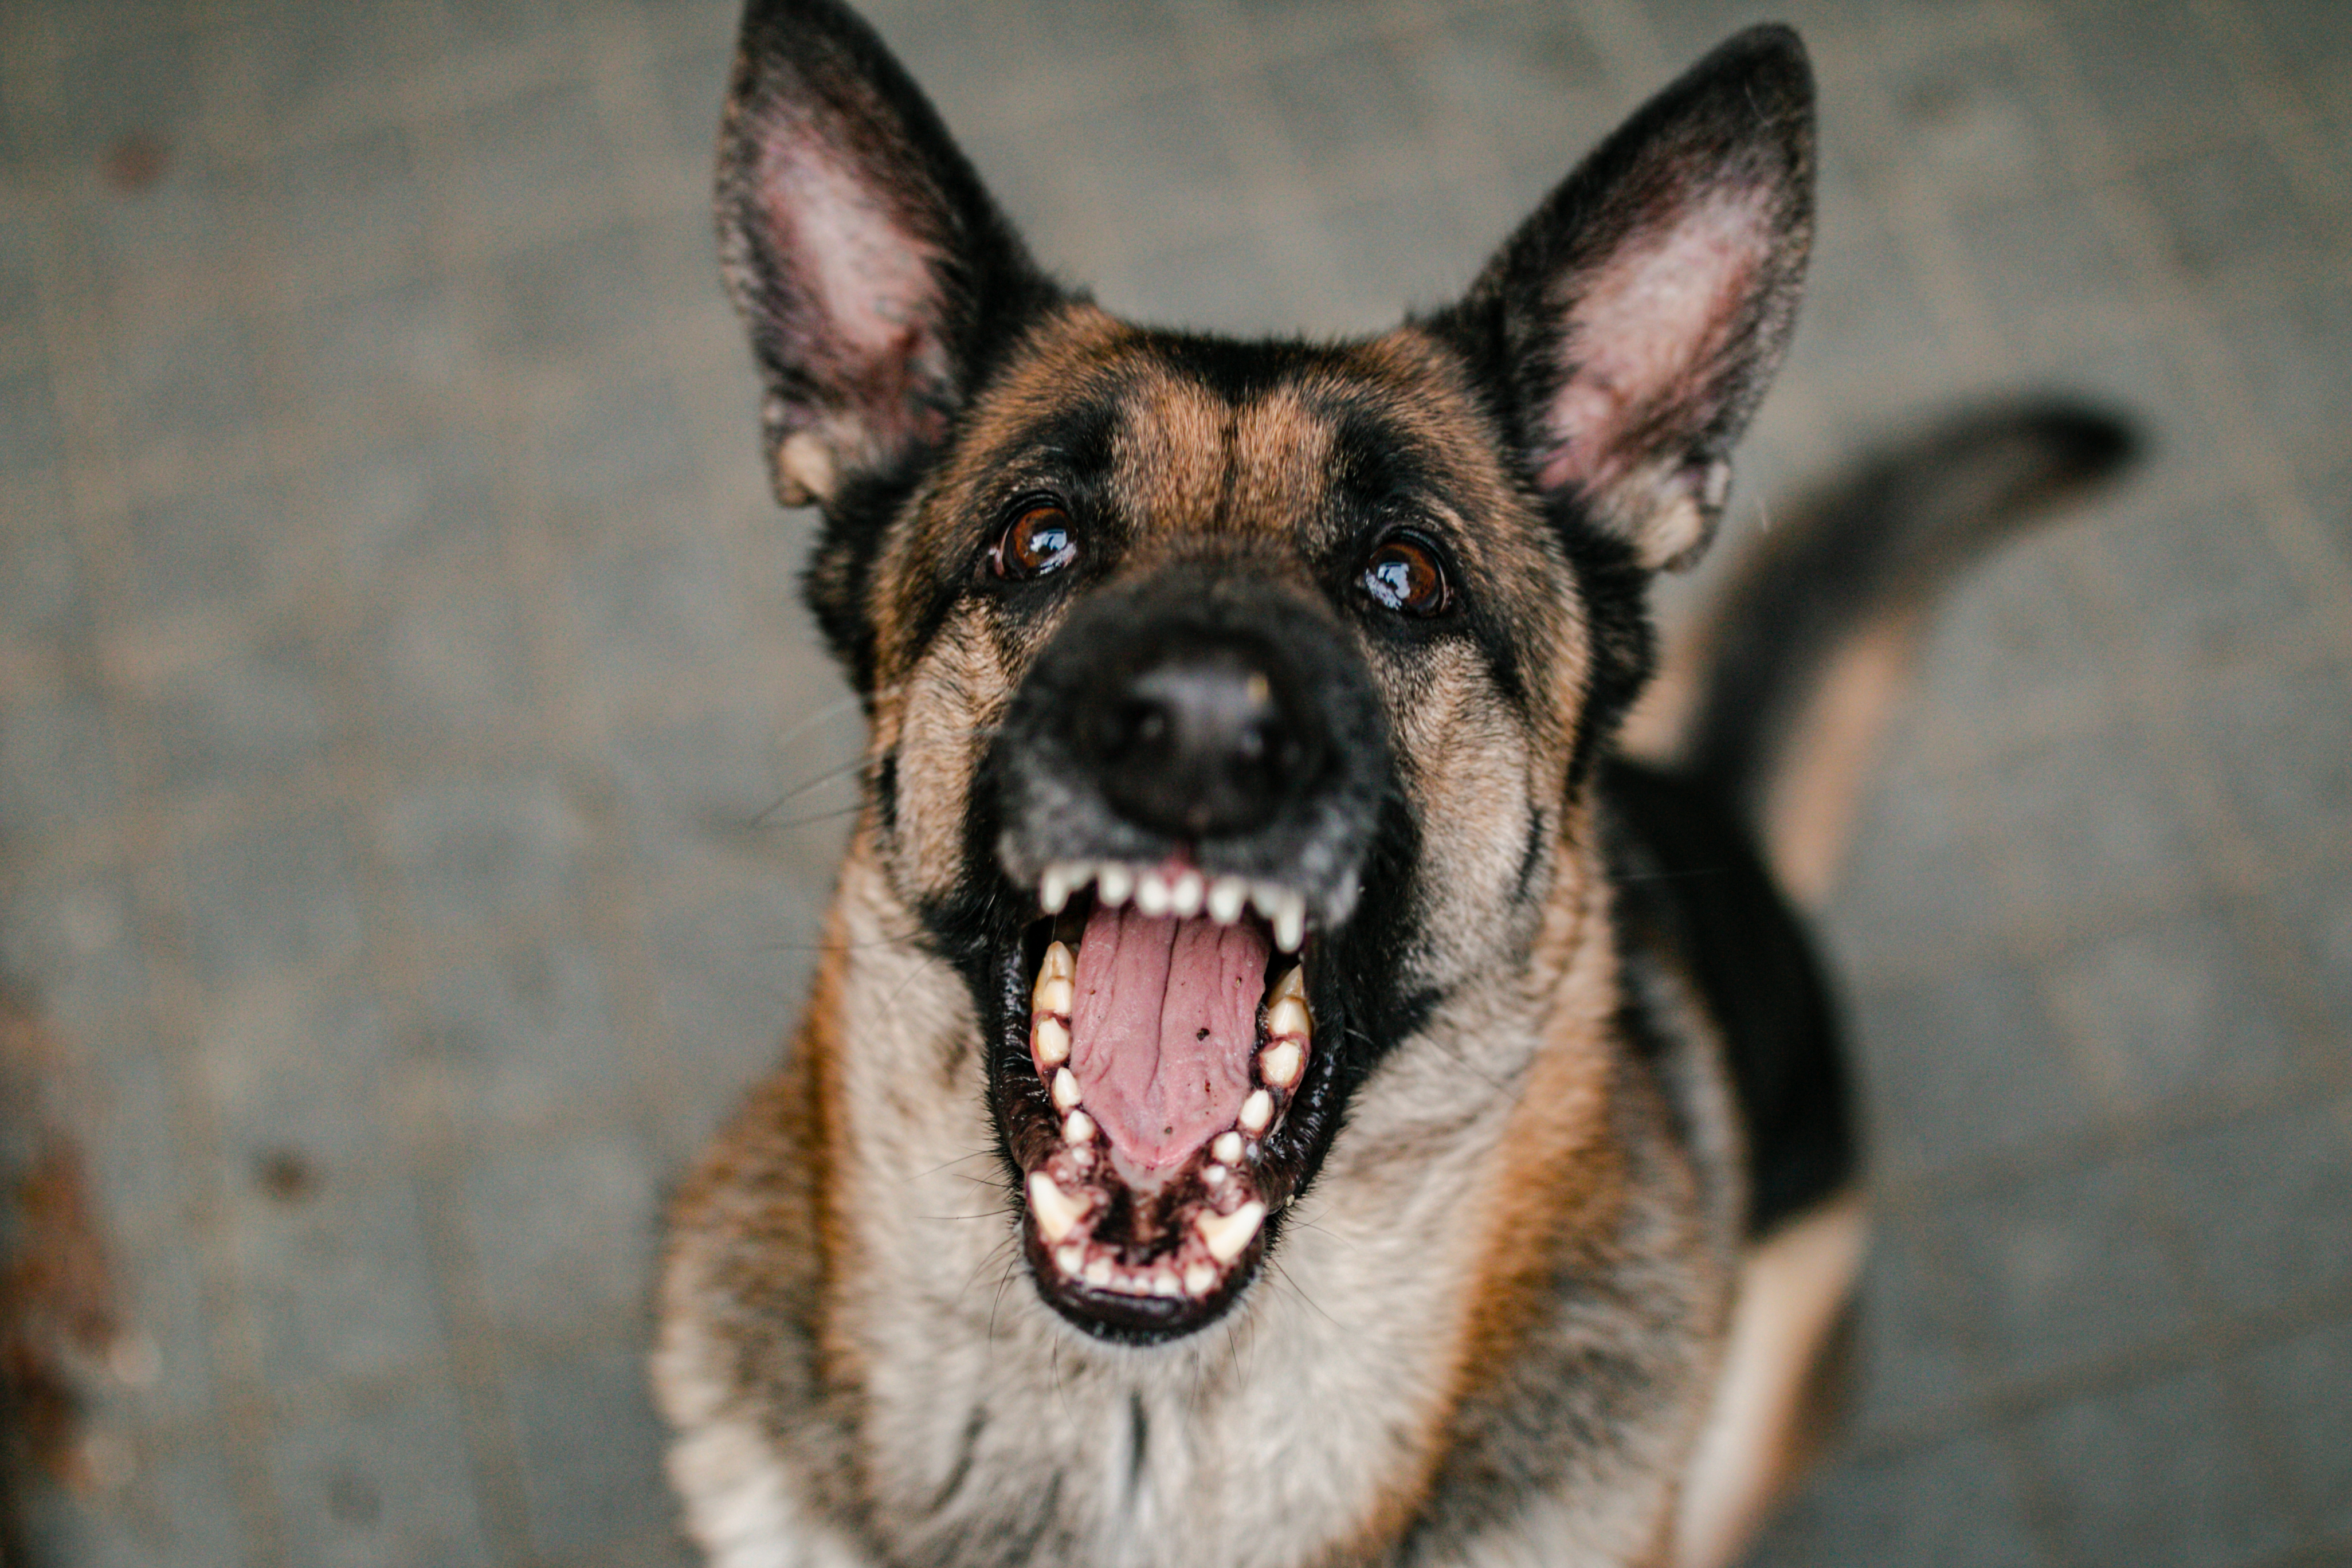 german shepherd catching treat that was dropped from above. The german shepherd has pricked ears, and he is showing teeth. His teeth are big and white and he looks like a scary dog | Source: Shutterstock